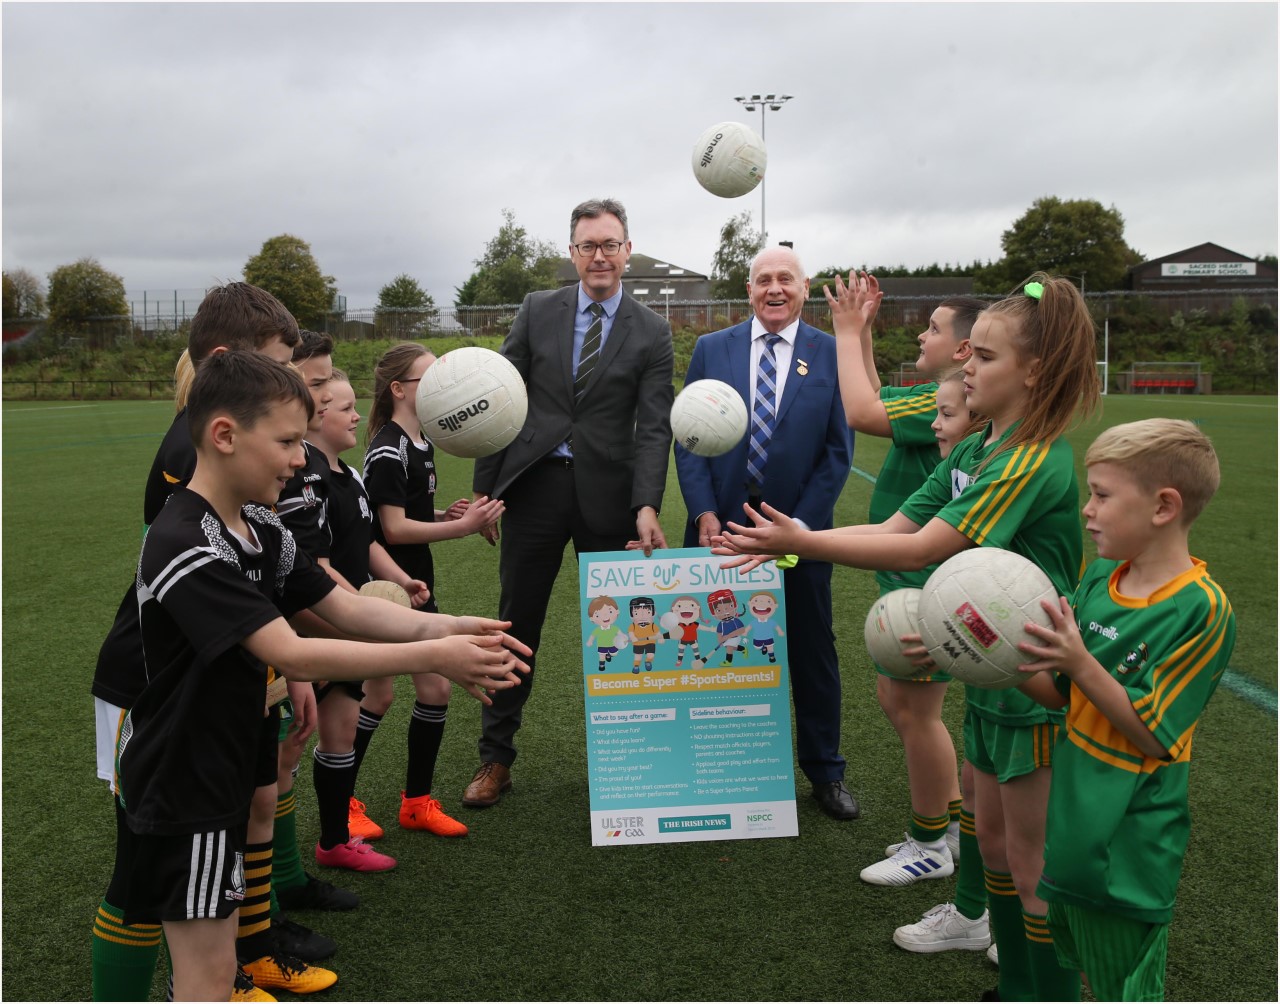 ‘Save our Smiles’ launched to promote the important role parents play in clubs